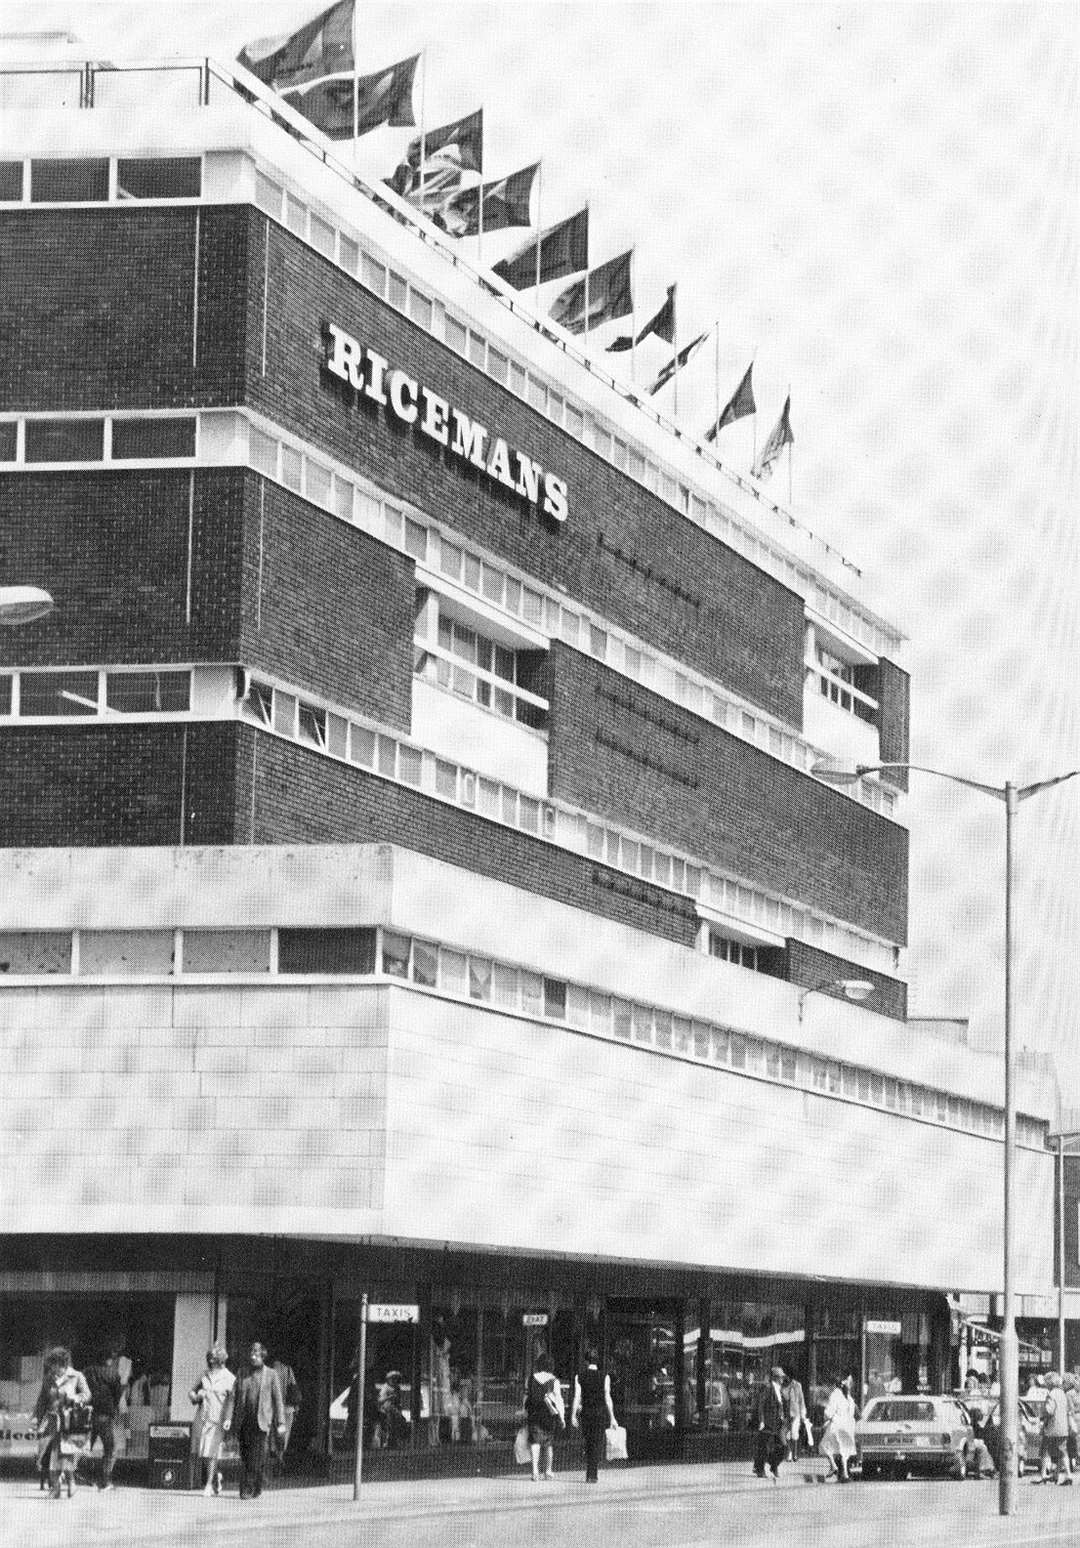 Ricemans in Canterbury, before it was torn down to make way for Whitefriars